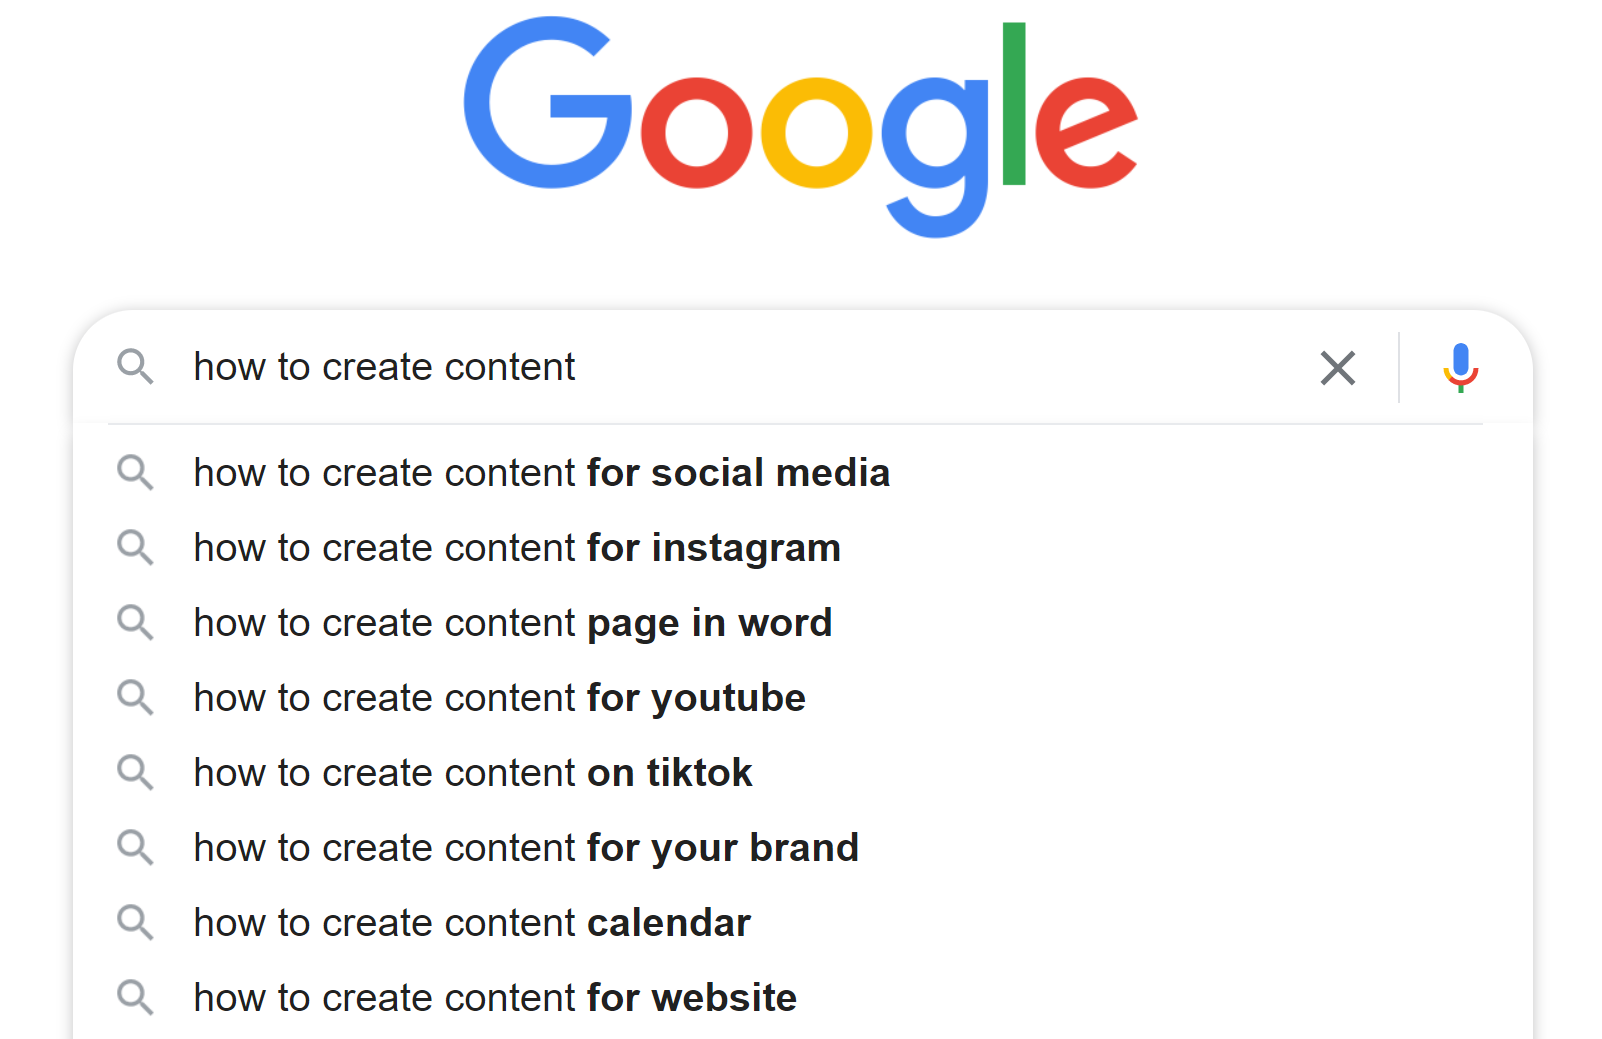 Google search queries about creating content